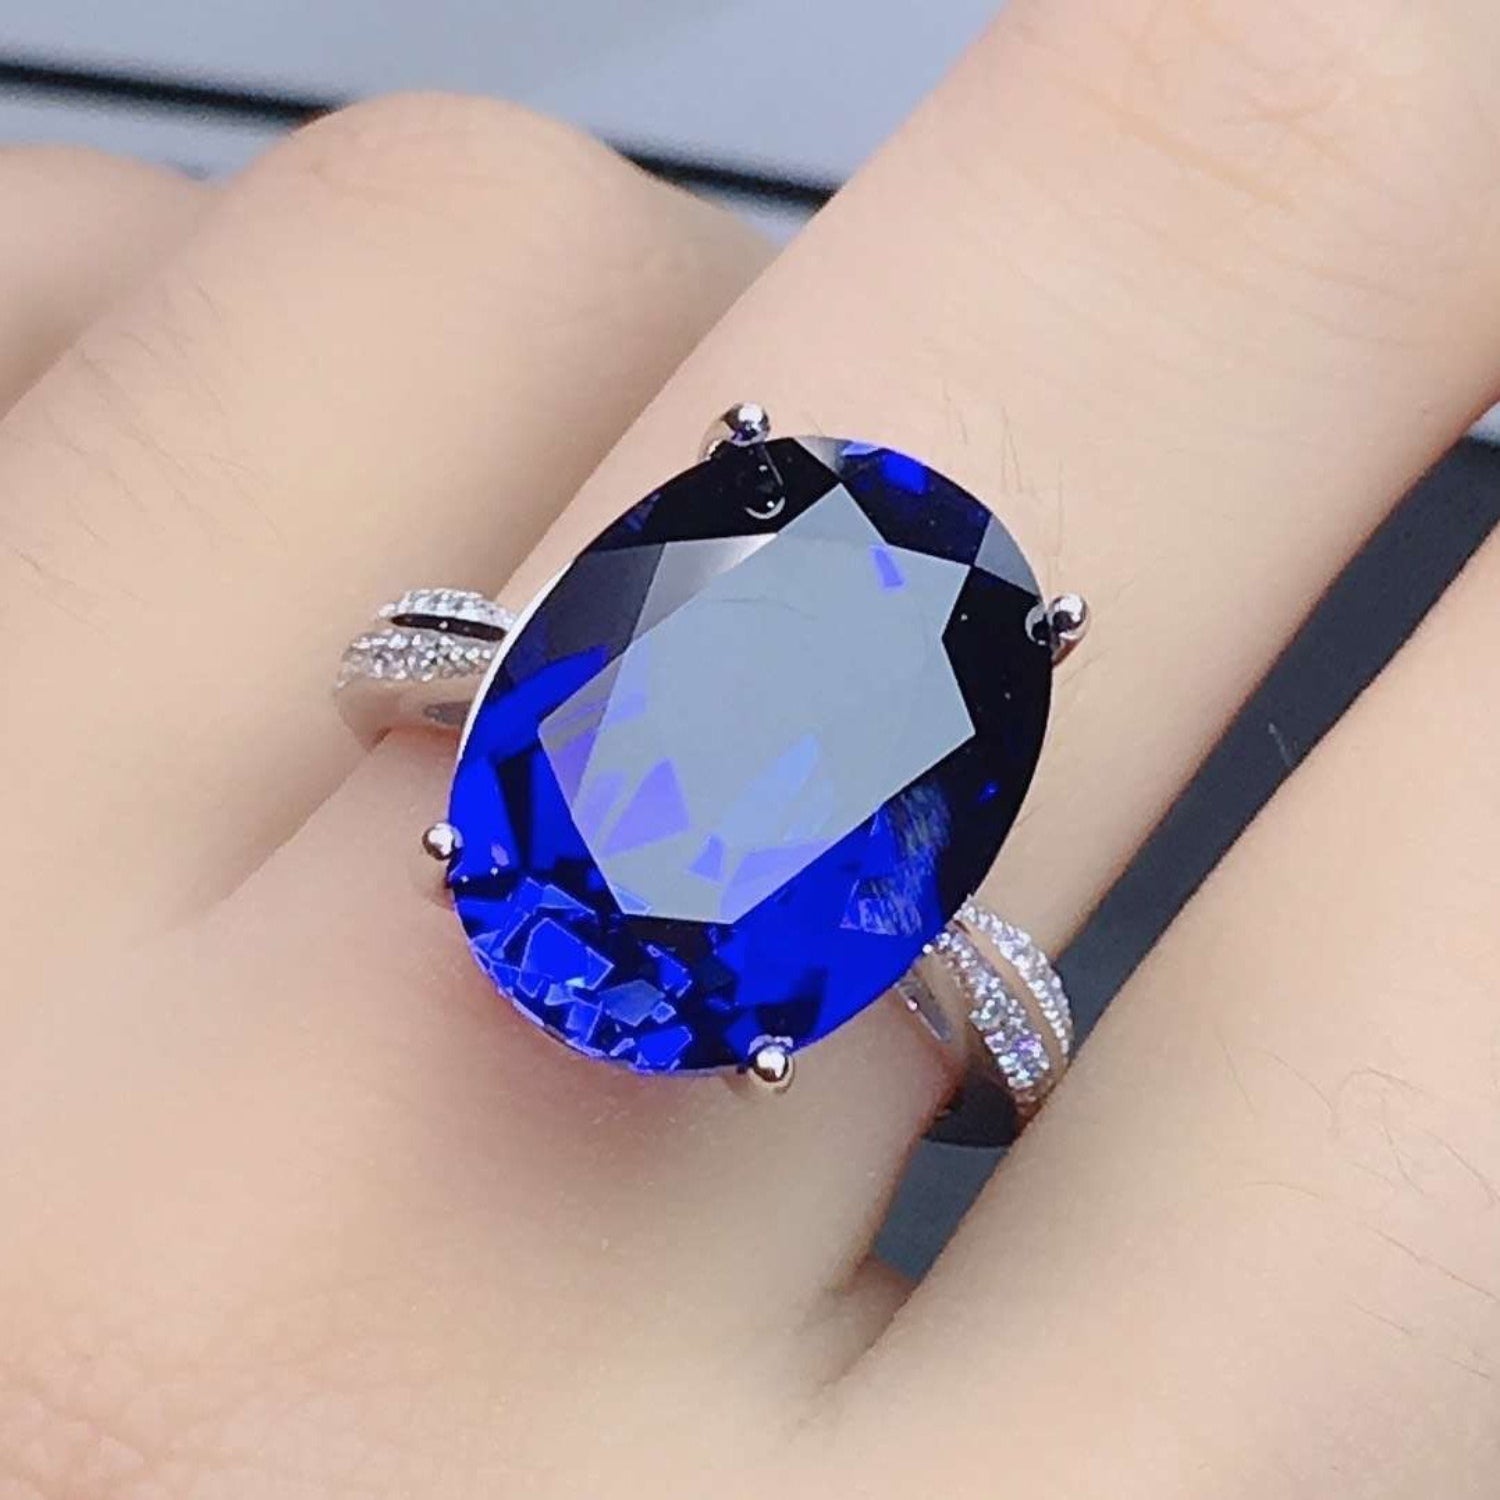 Platinum-Plated Artificial Gemstone Ring - Tophatter Deals